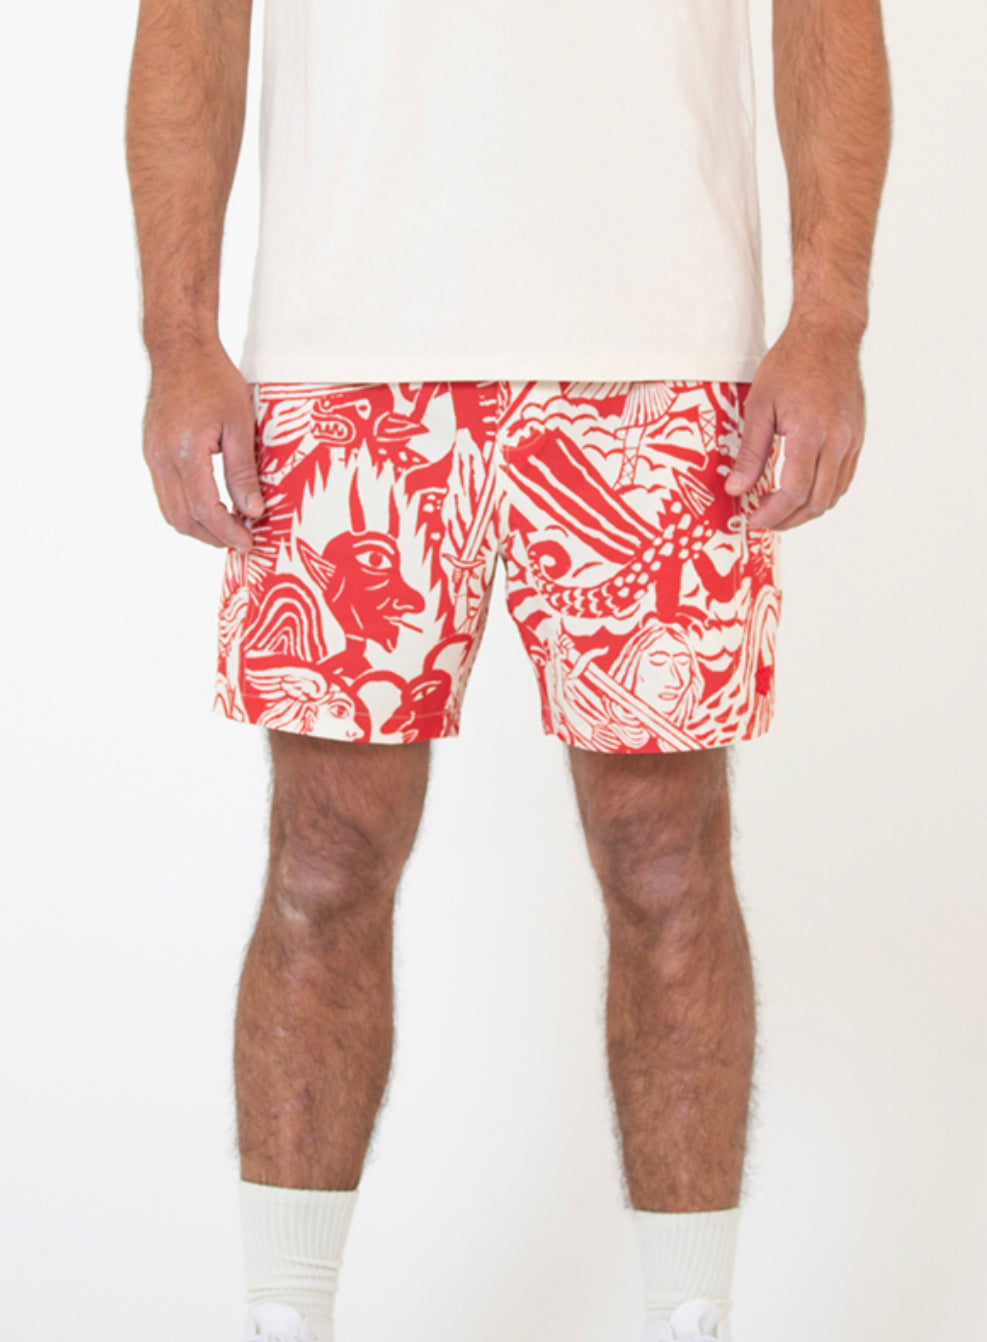 Angels and Demons Boardshort